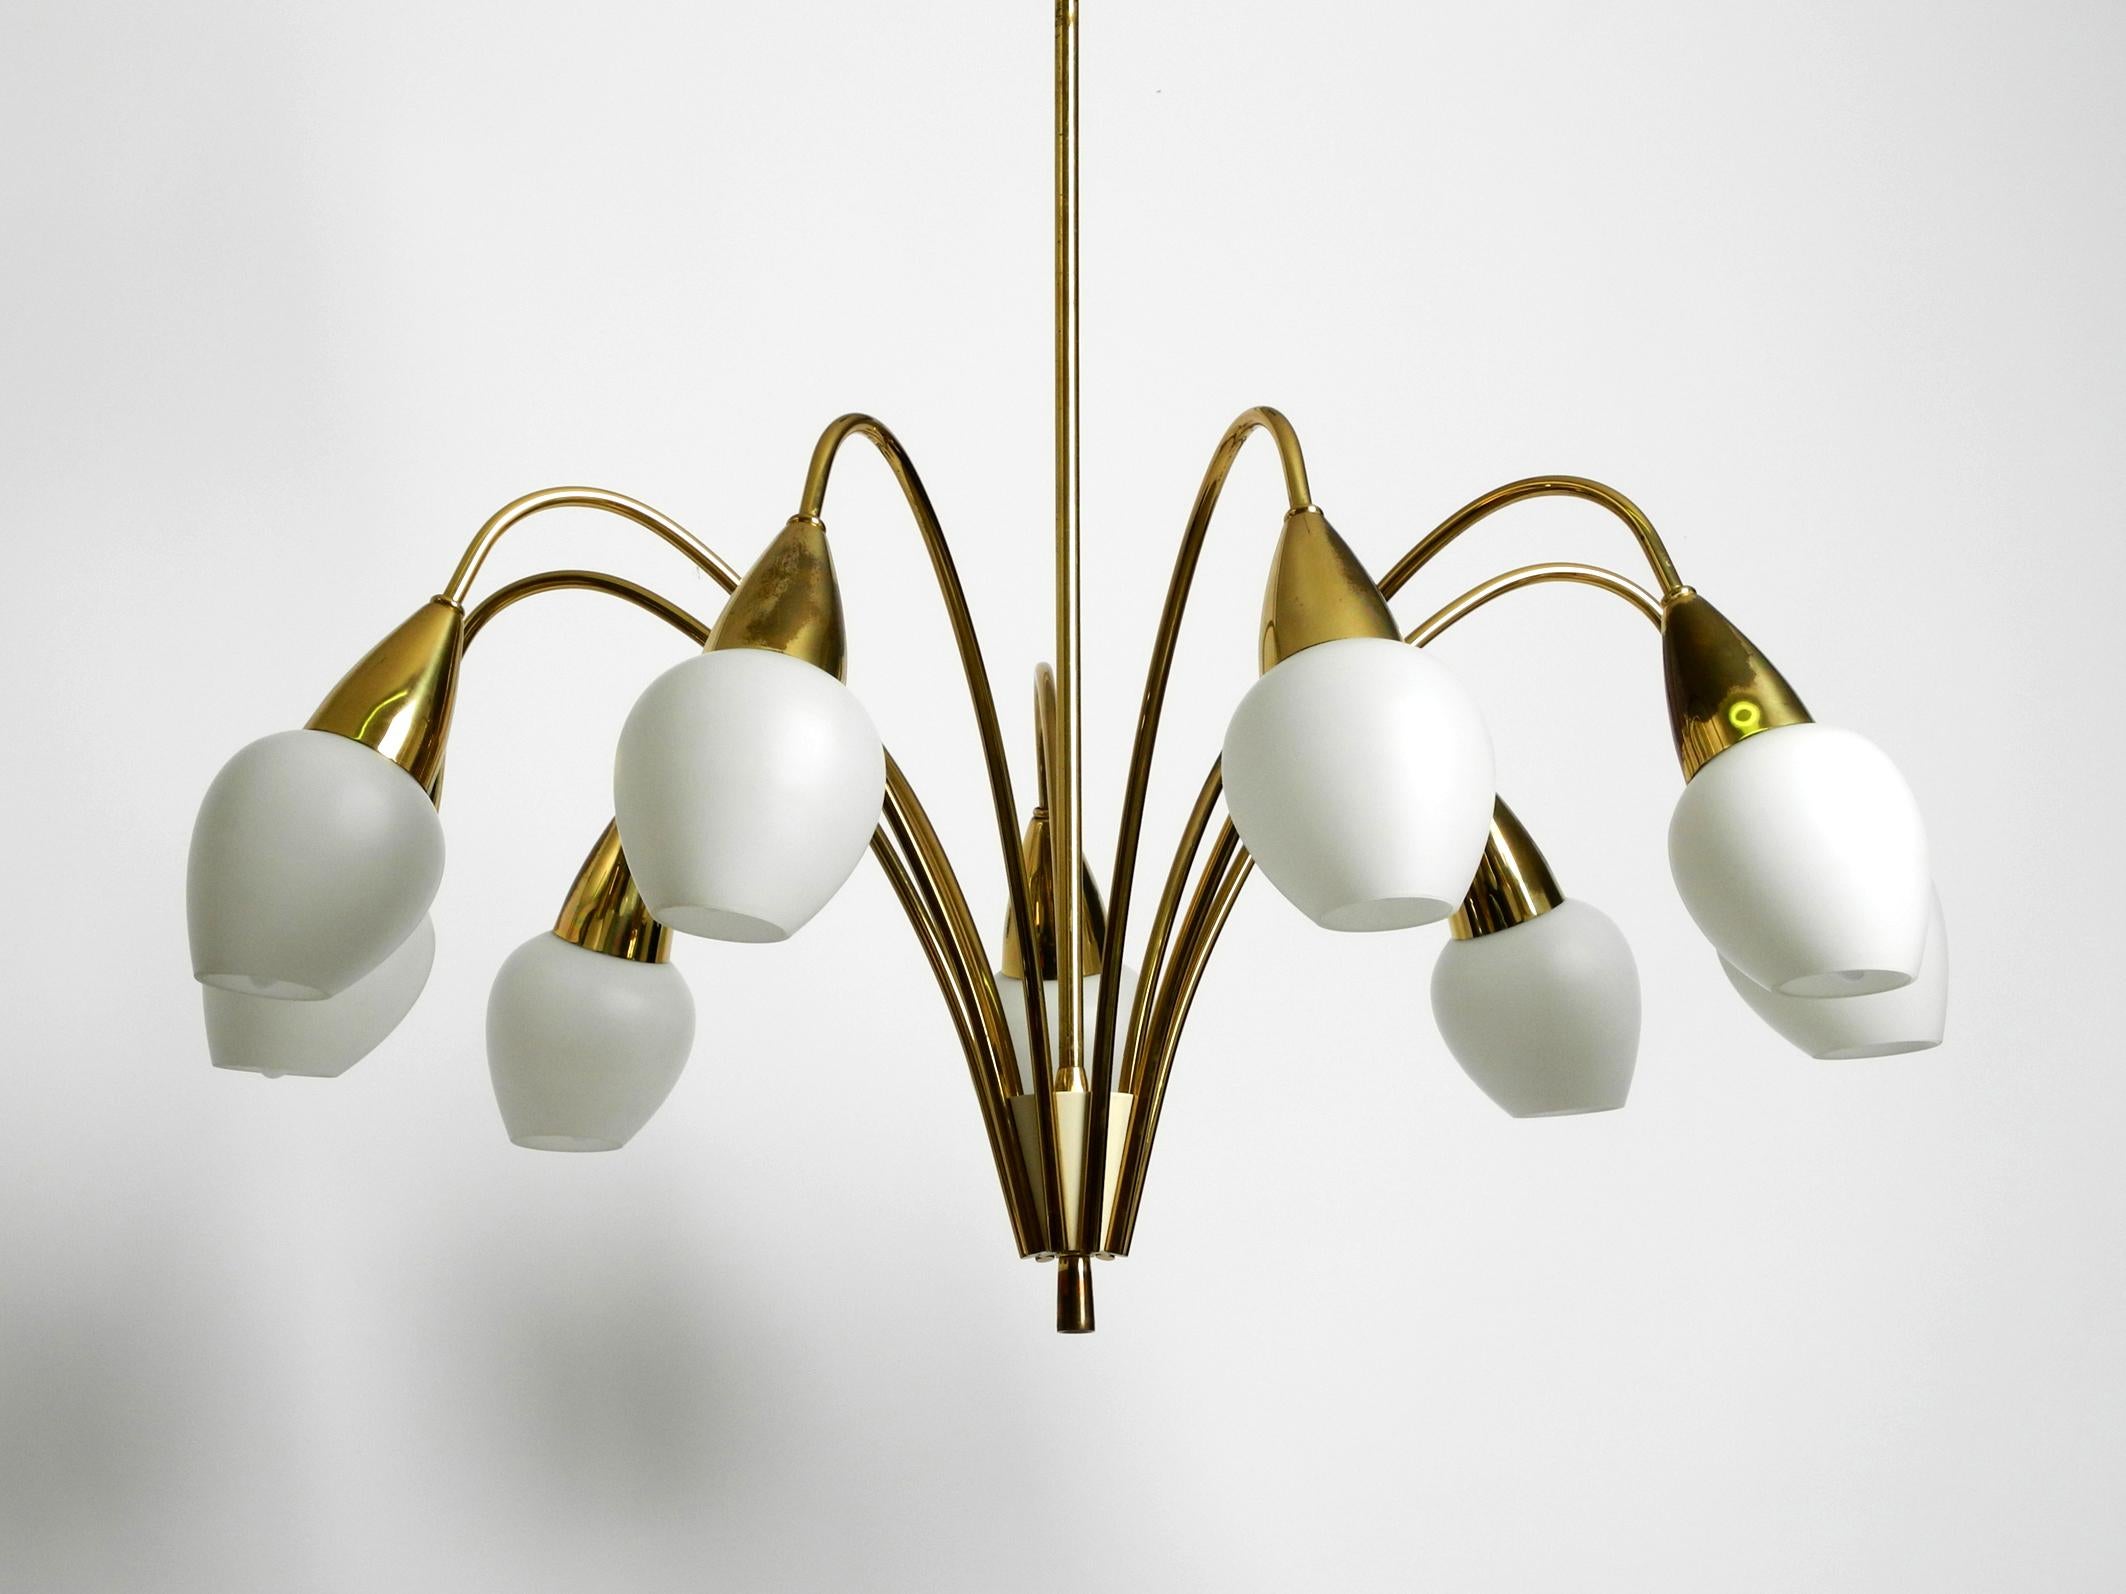 Fantastically 9-armed large mid-century brass chandelier with opal glass shades In Good Condition For Sale In München, DE